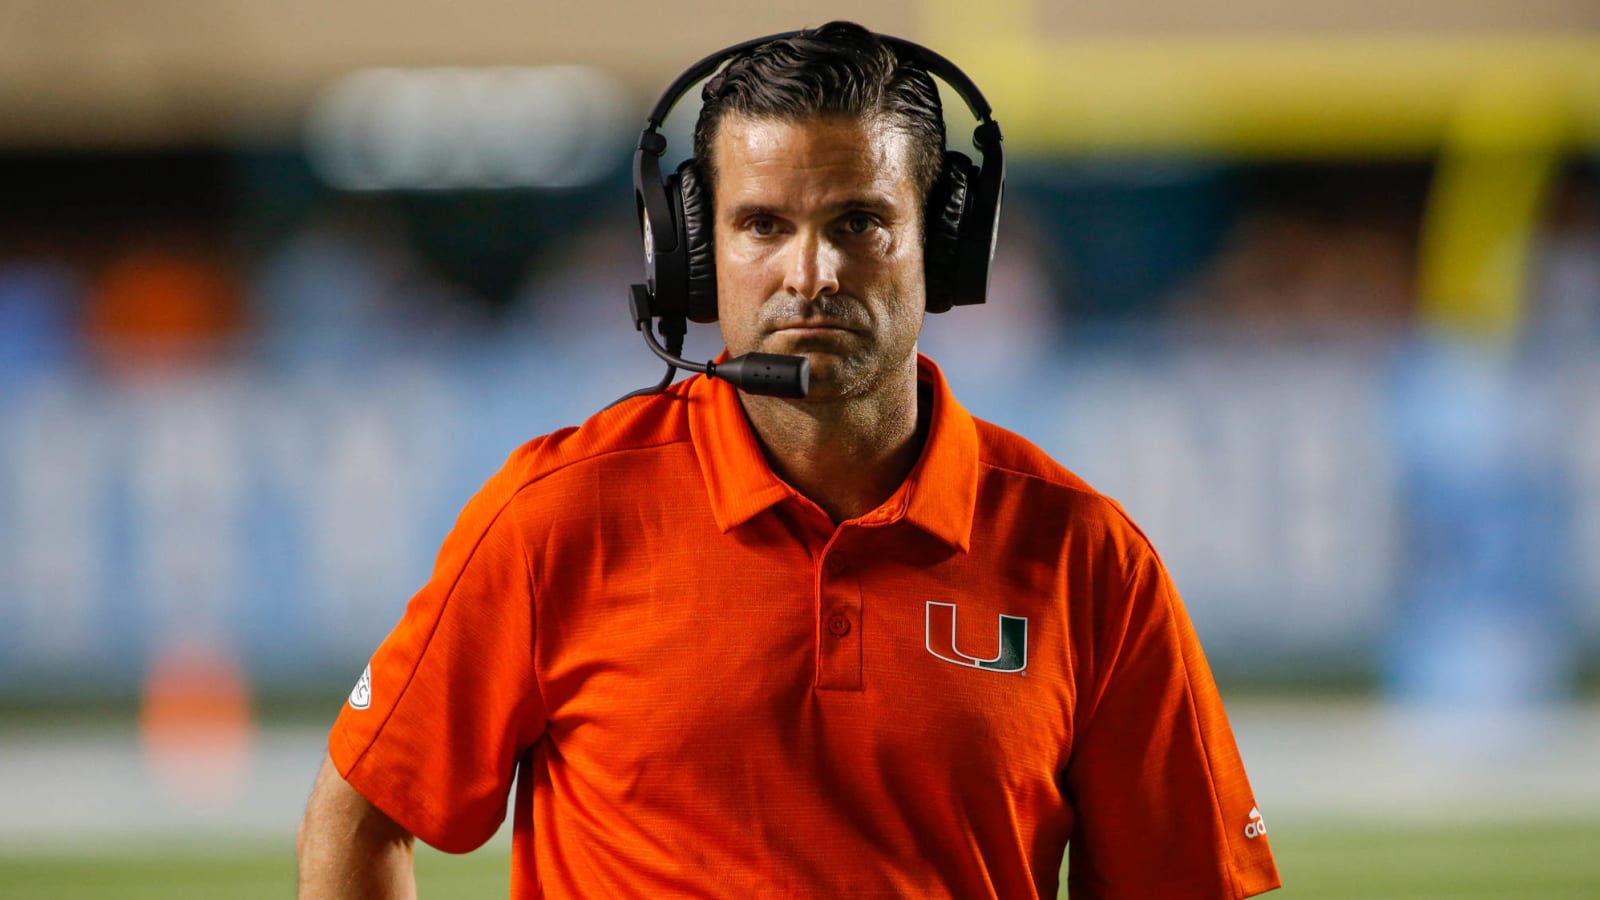 Hurricanes coach Manny Diaz tests positive for COVID-19